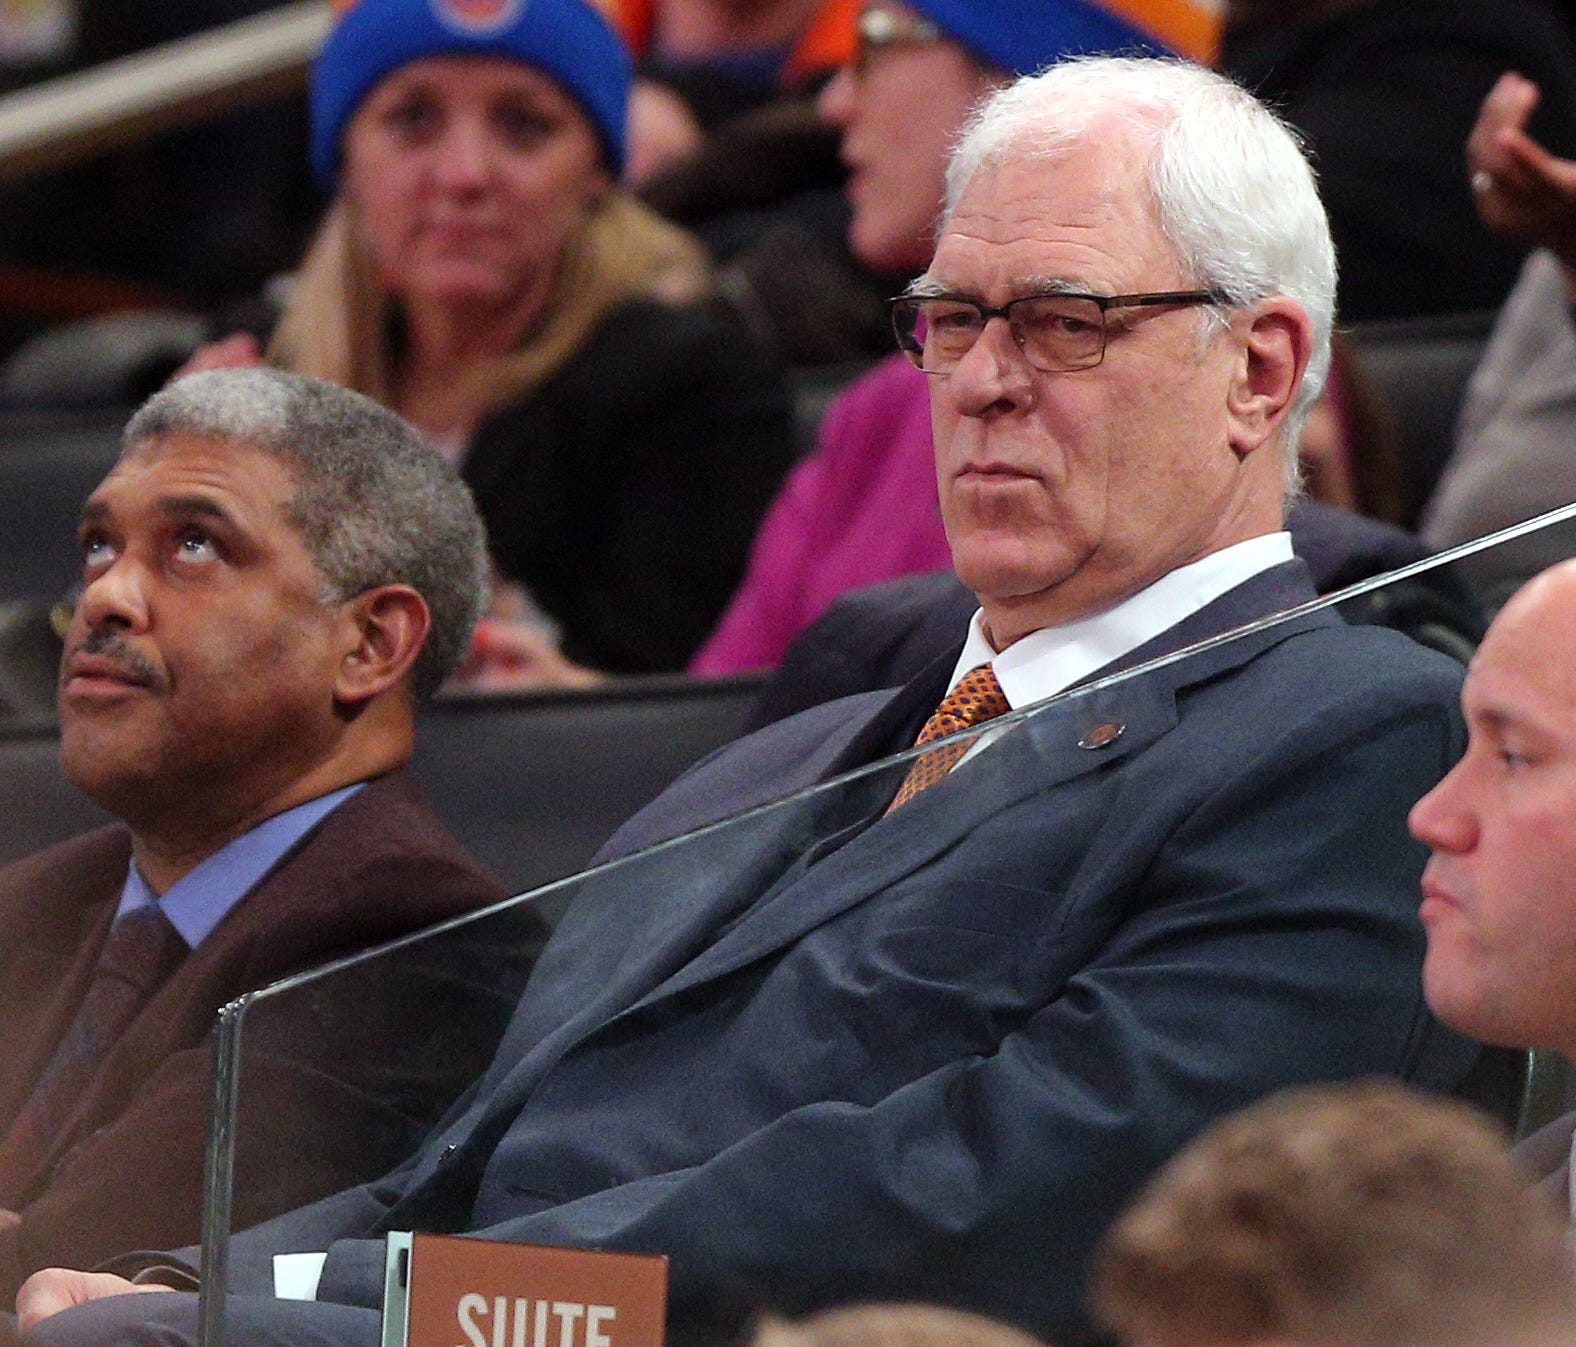 New York Knicks general manager Phil Jackson needs to go, says former player Kenyon Martin.